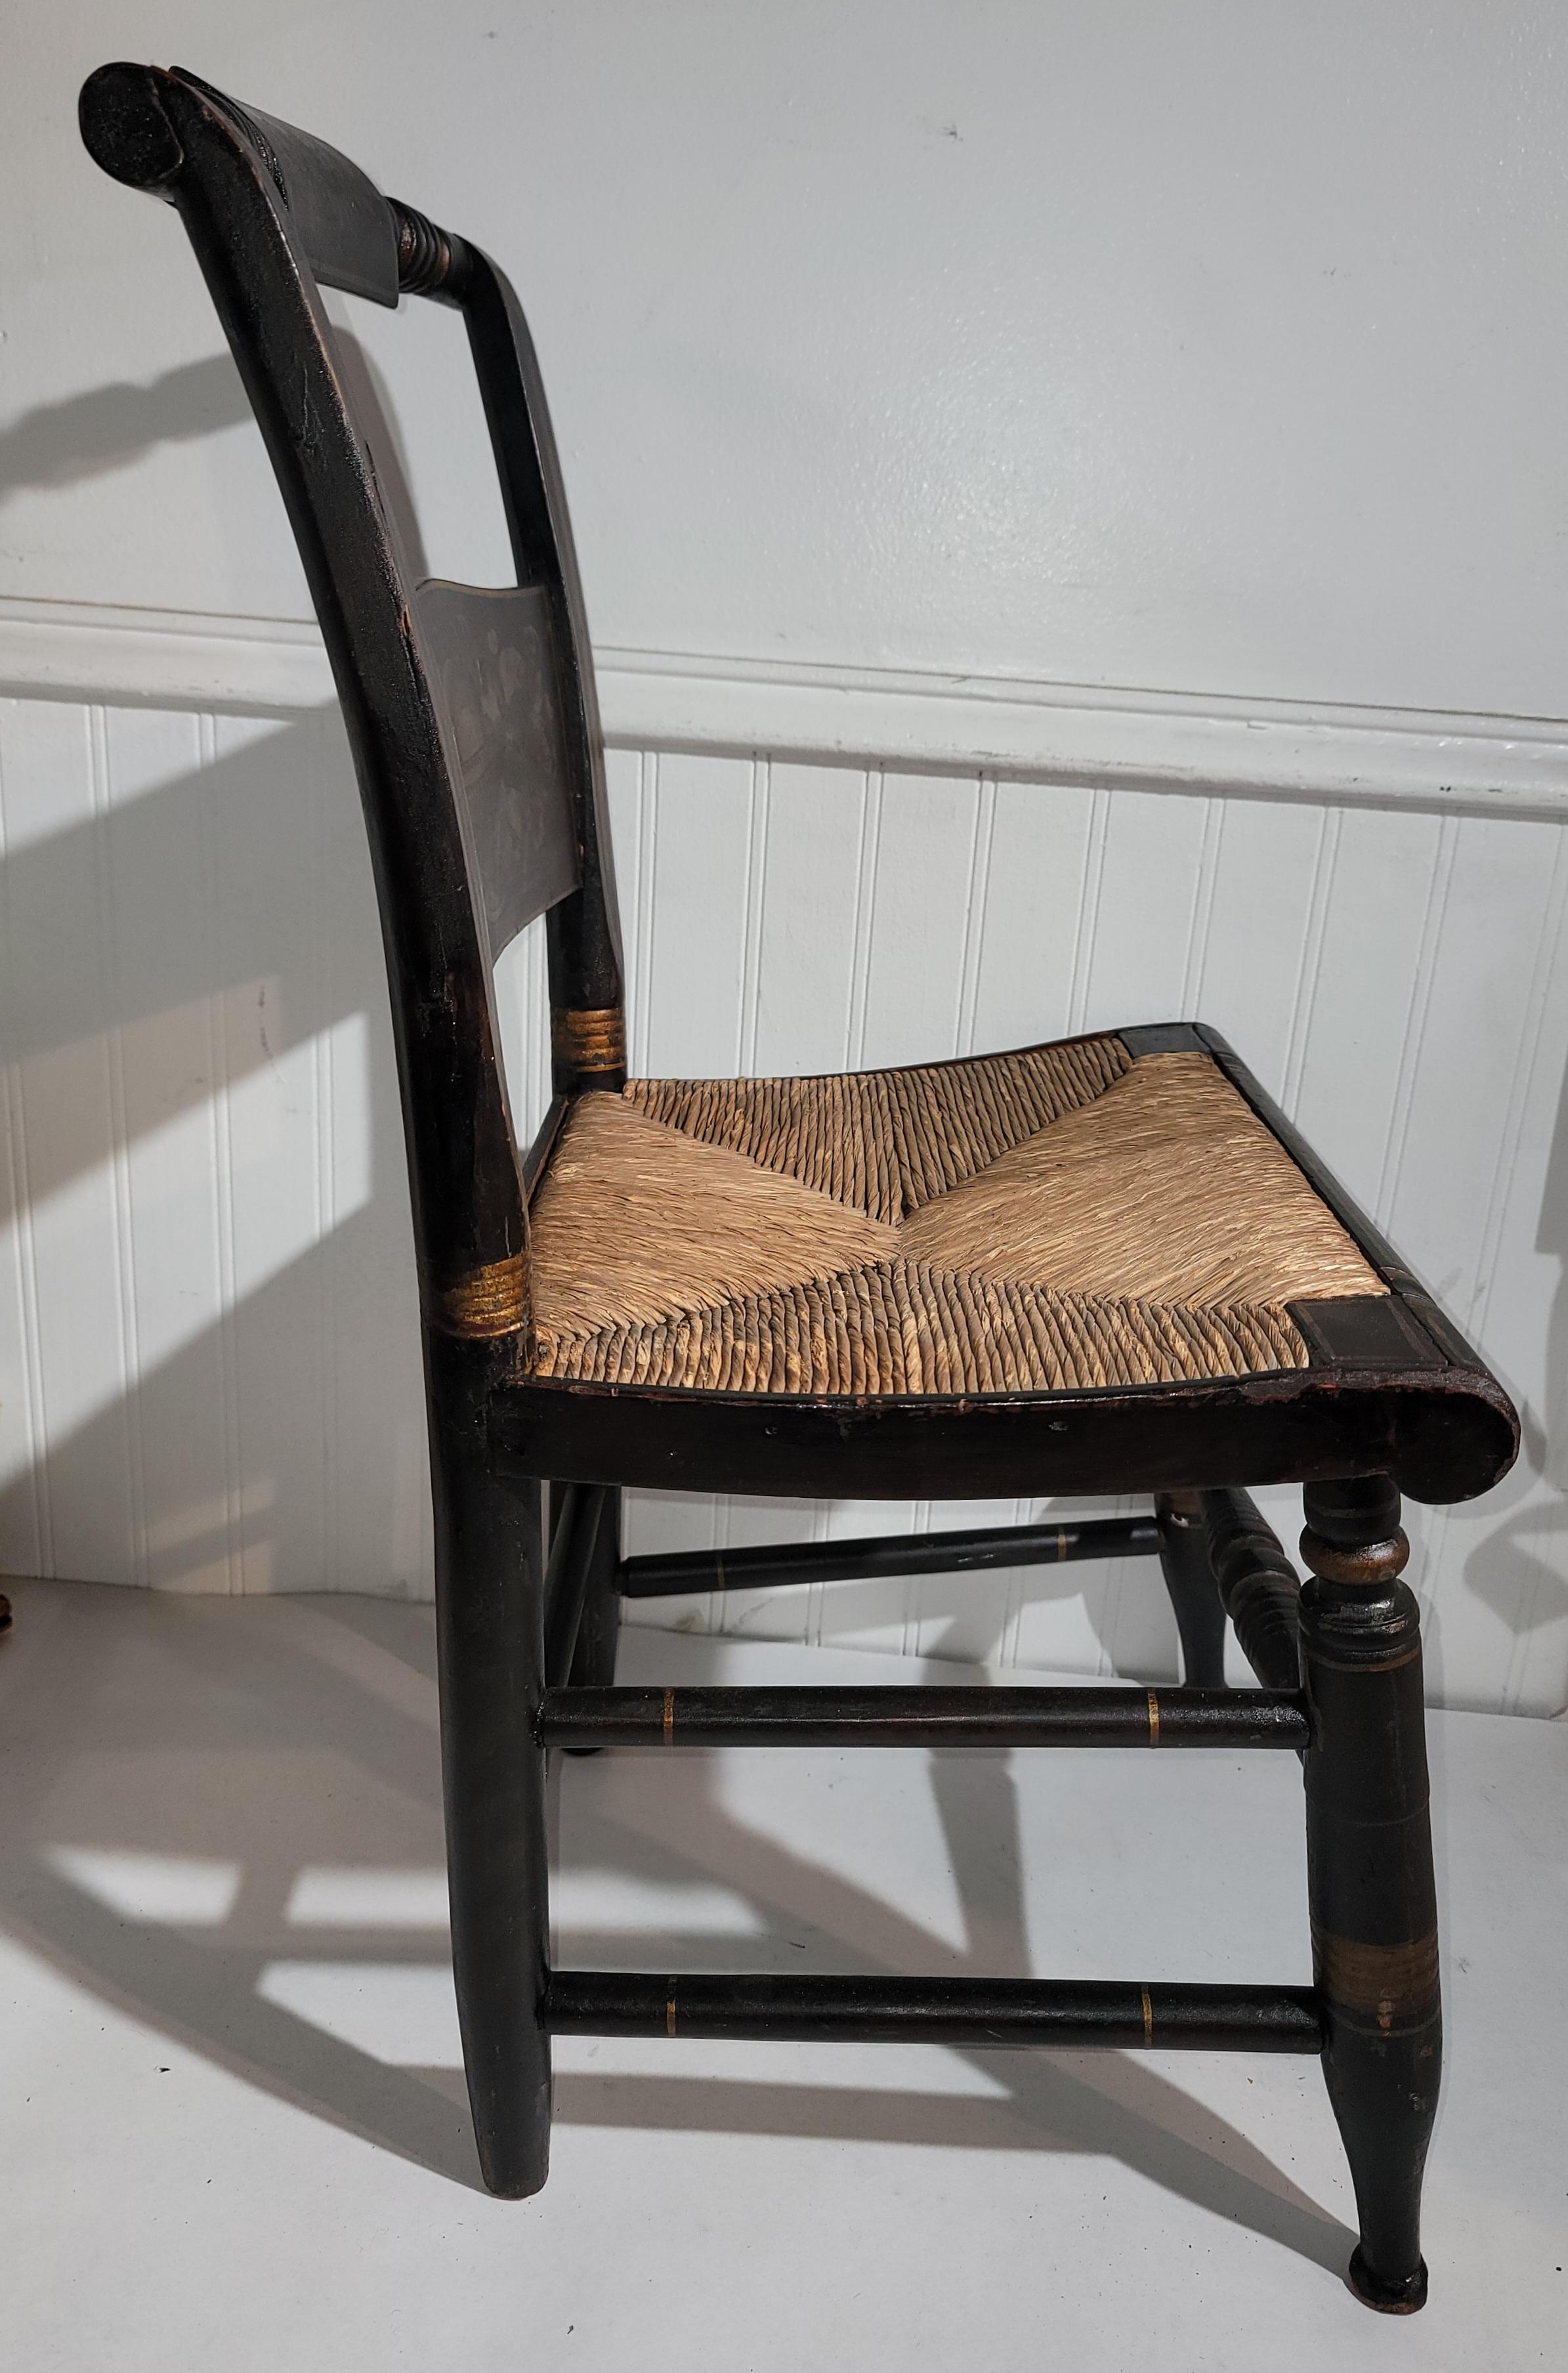 19Thc Original stencil painted children's  chair with original hand woven rush seat and in very sturdy condition.Fine undisturbed painted surface.